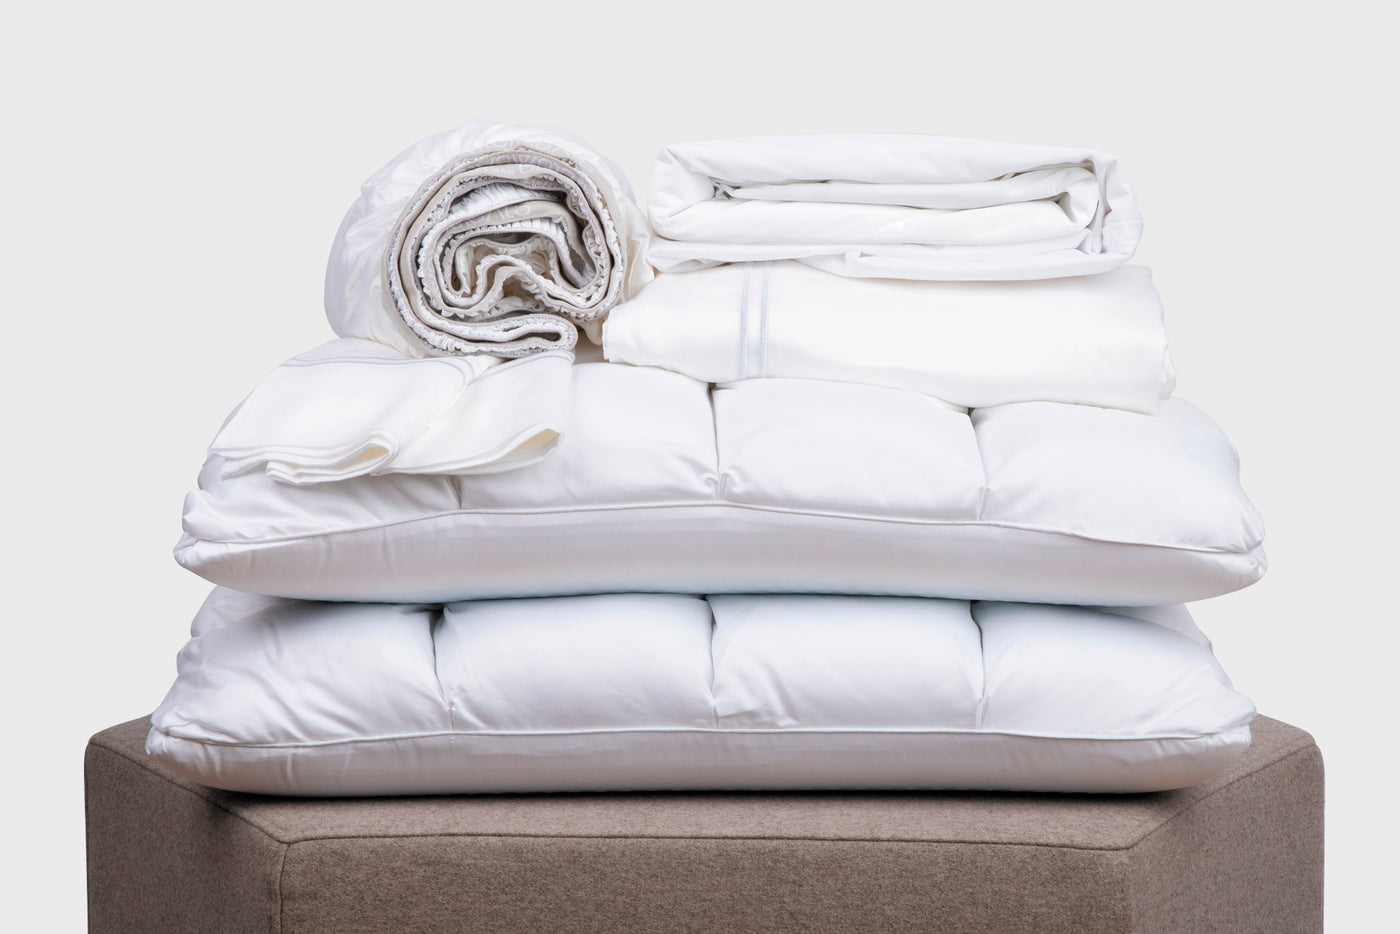 Image of a stack of bedding on top of a brown stool with a white background. The stack showcases (from top to bottom): a white rolled-up fitted sheet, a white folded flat sheet, two white pillowcases, two SoftCell® pillows